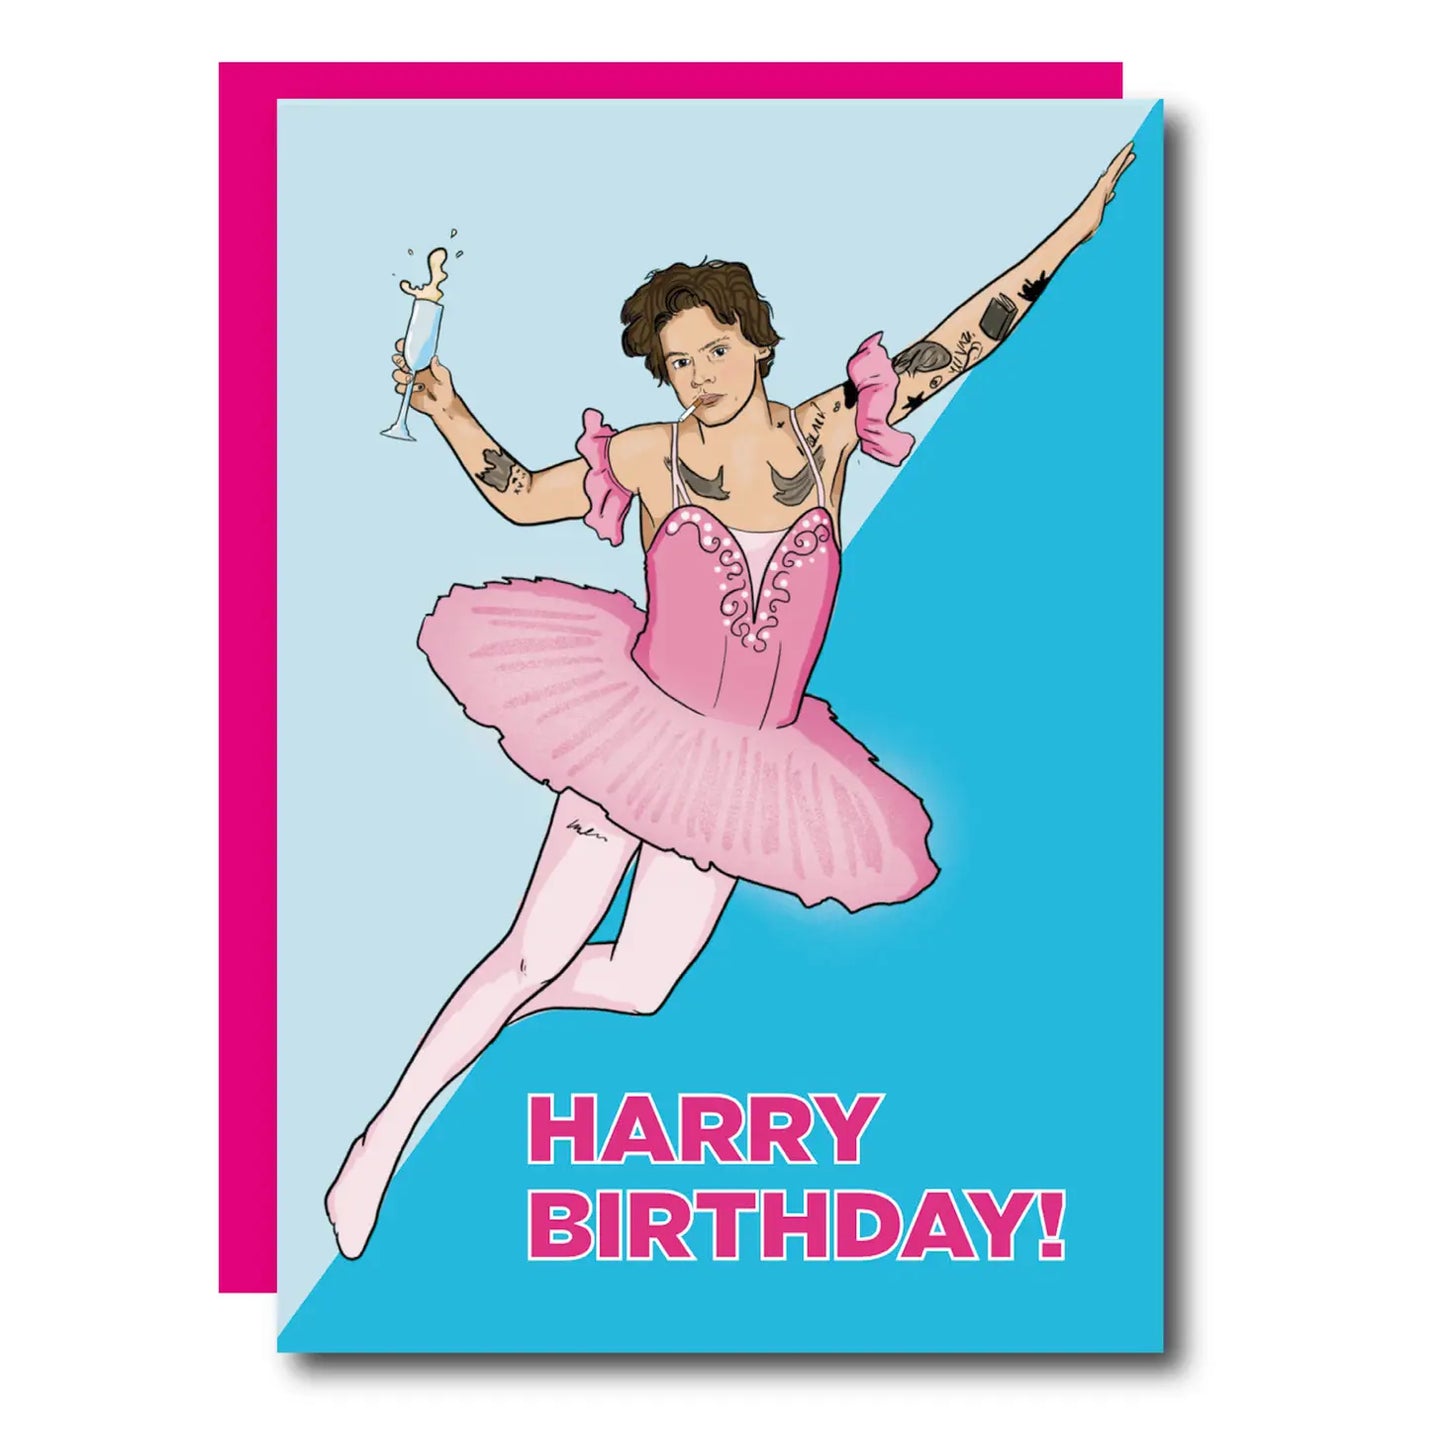 Celebrity Greeting Cards - Bowie, Taylor, Beyonce, Harry Styles + More